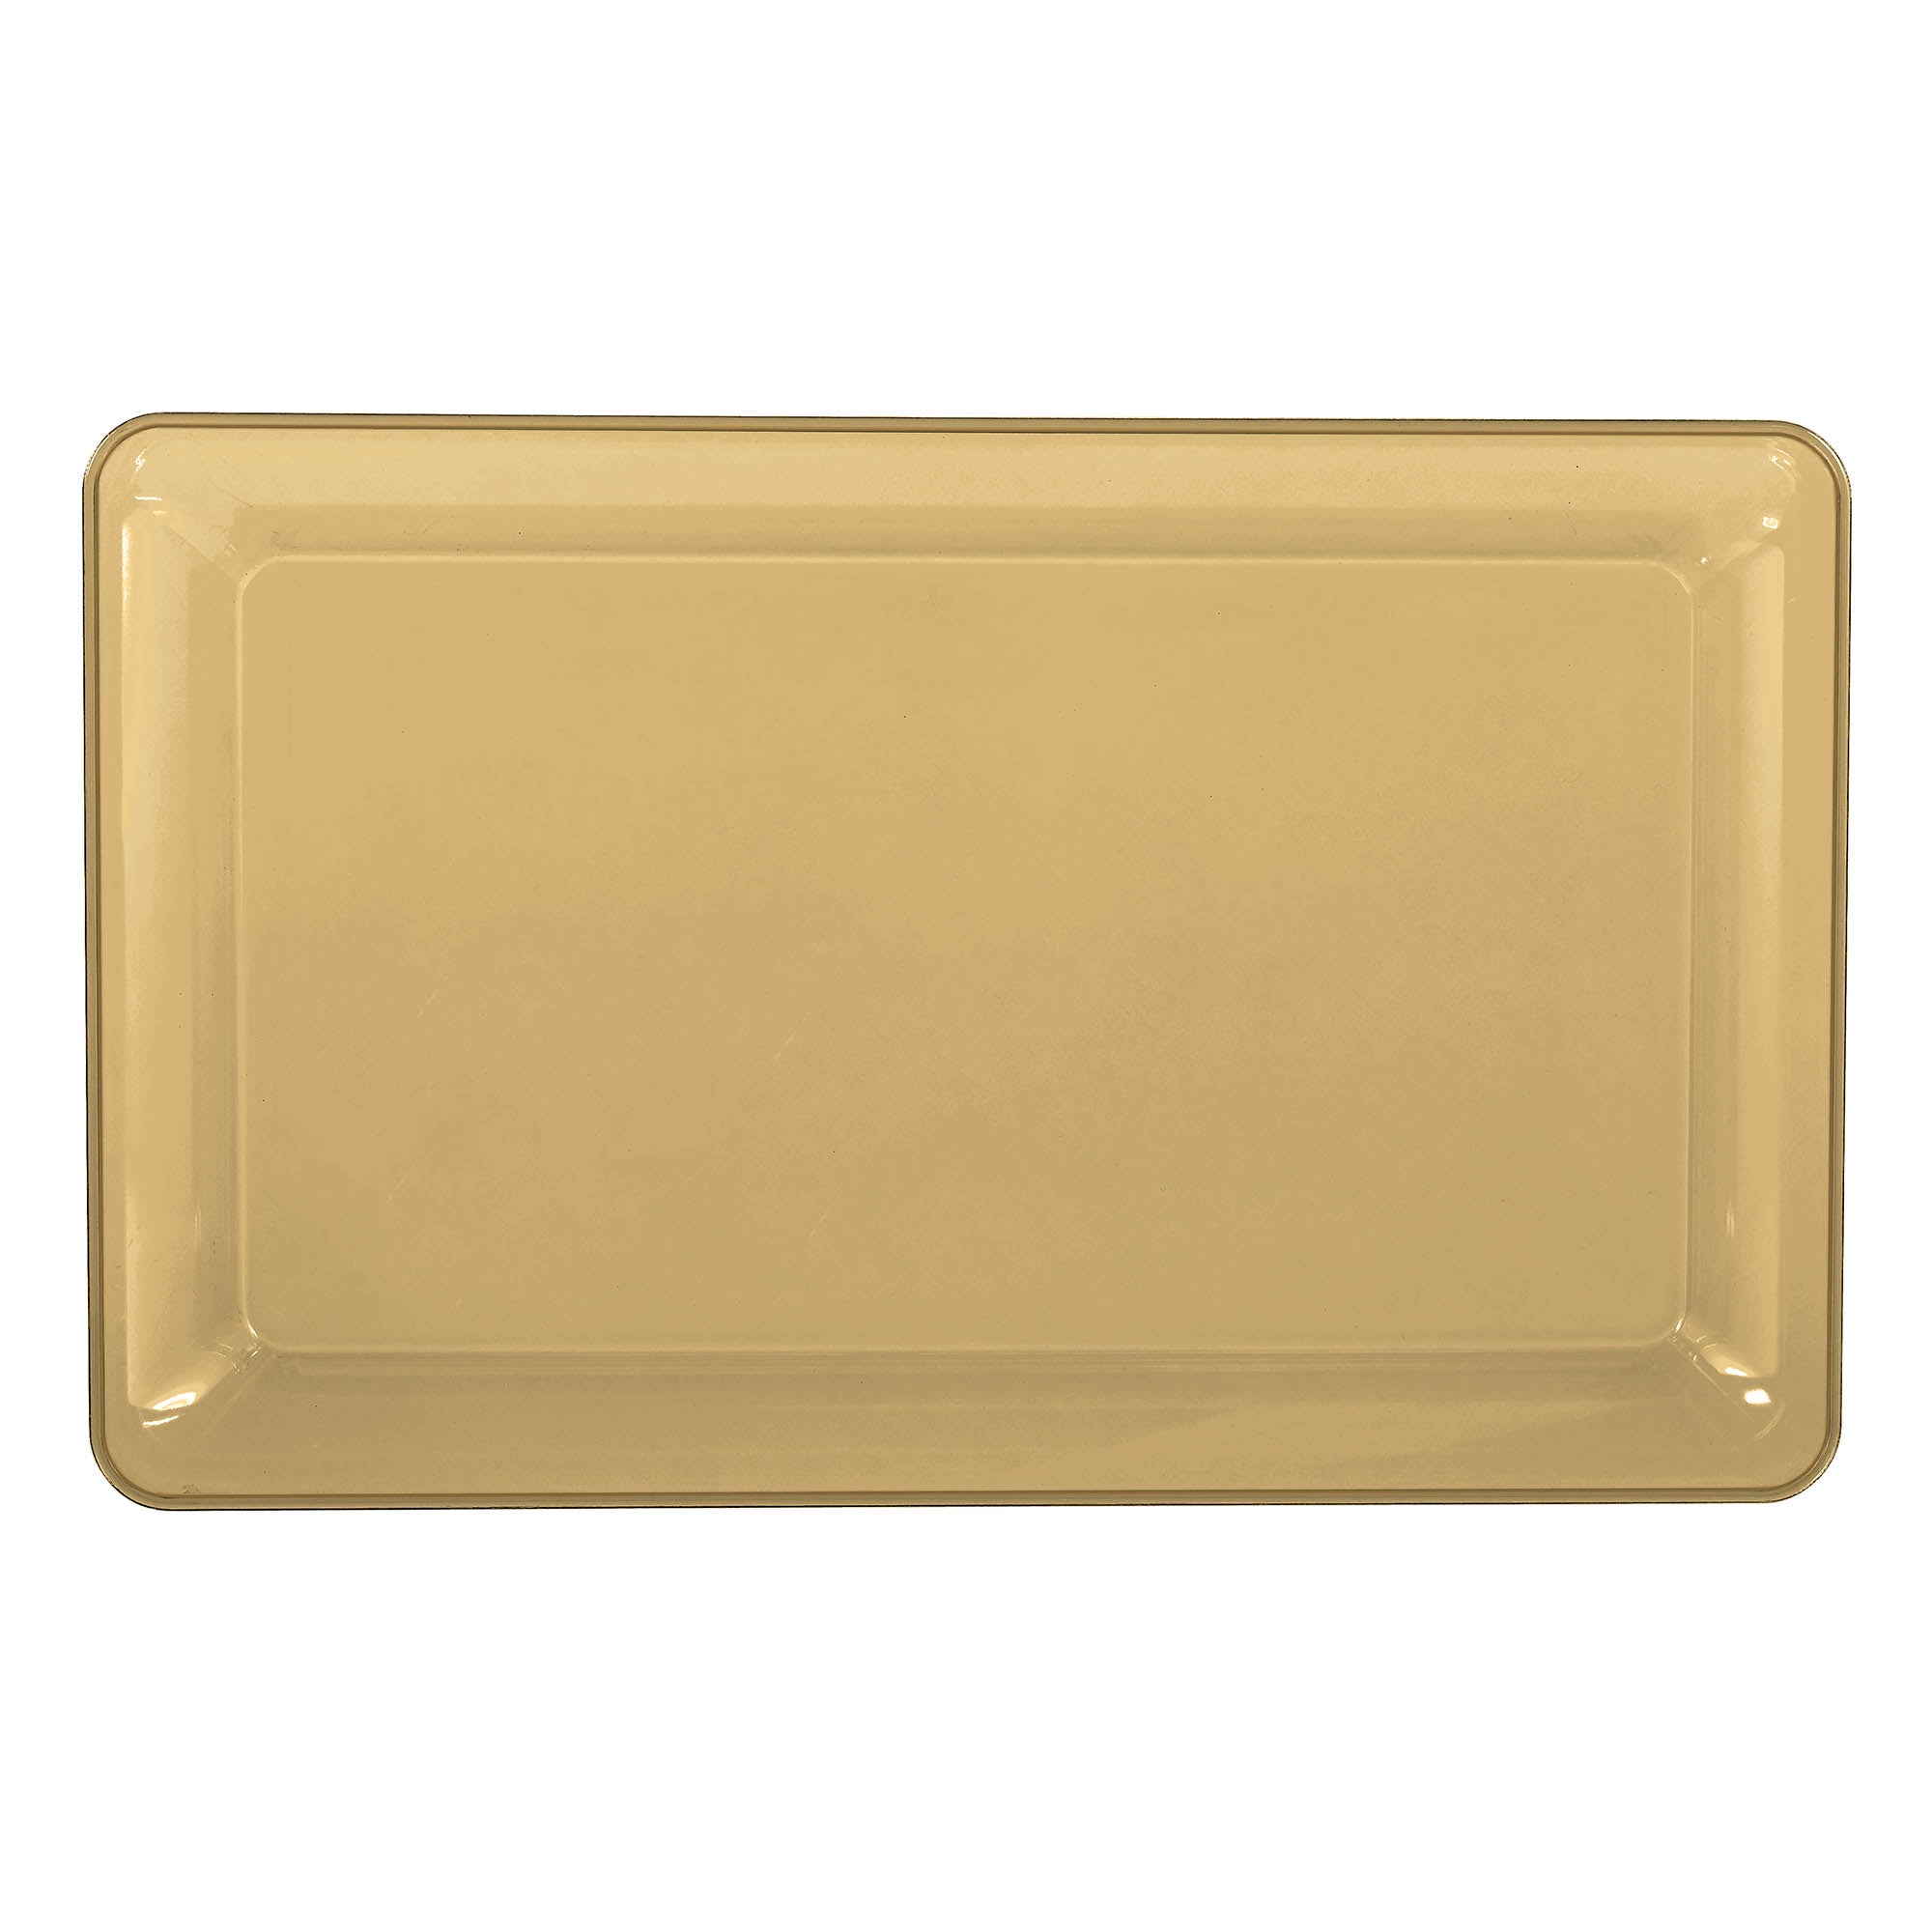 Plastic Tray  Gold  11x18in